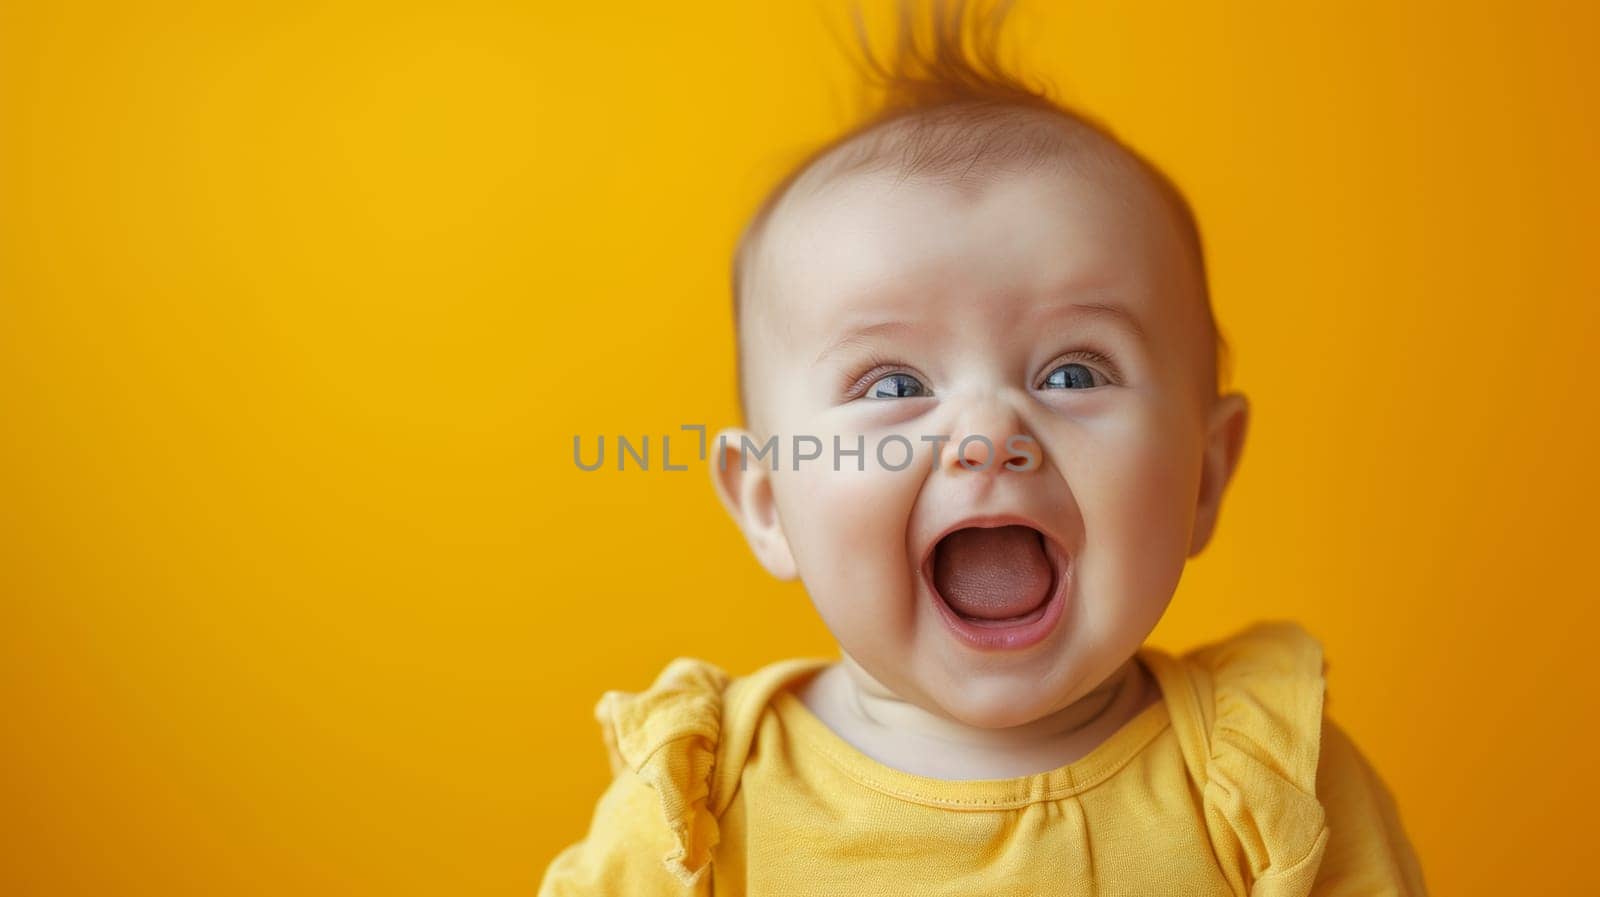 A baby with a big smile on his face and yellow background